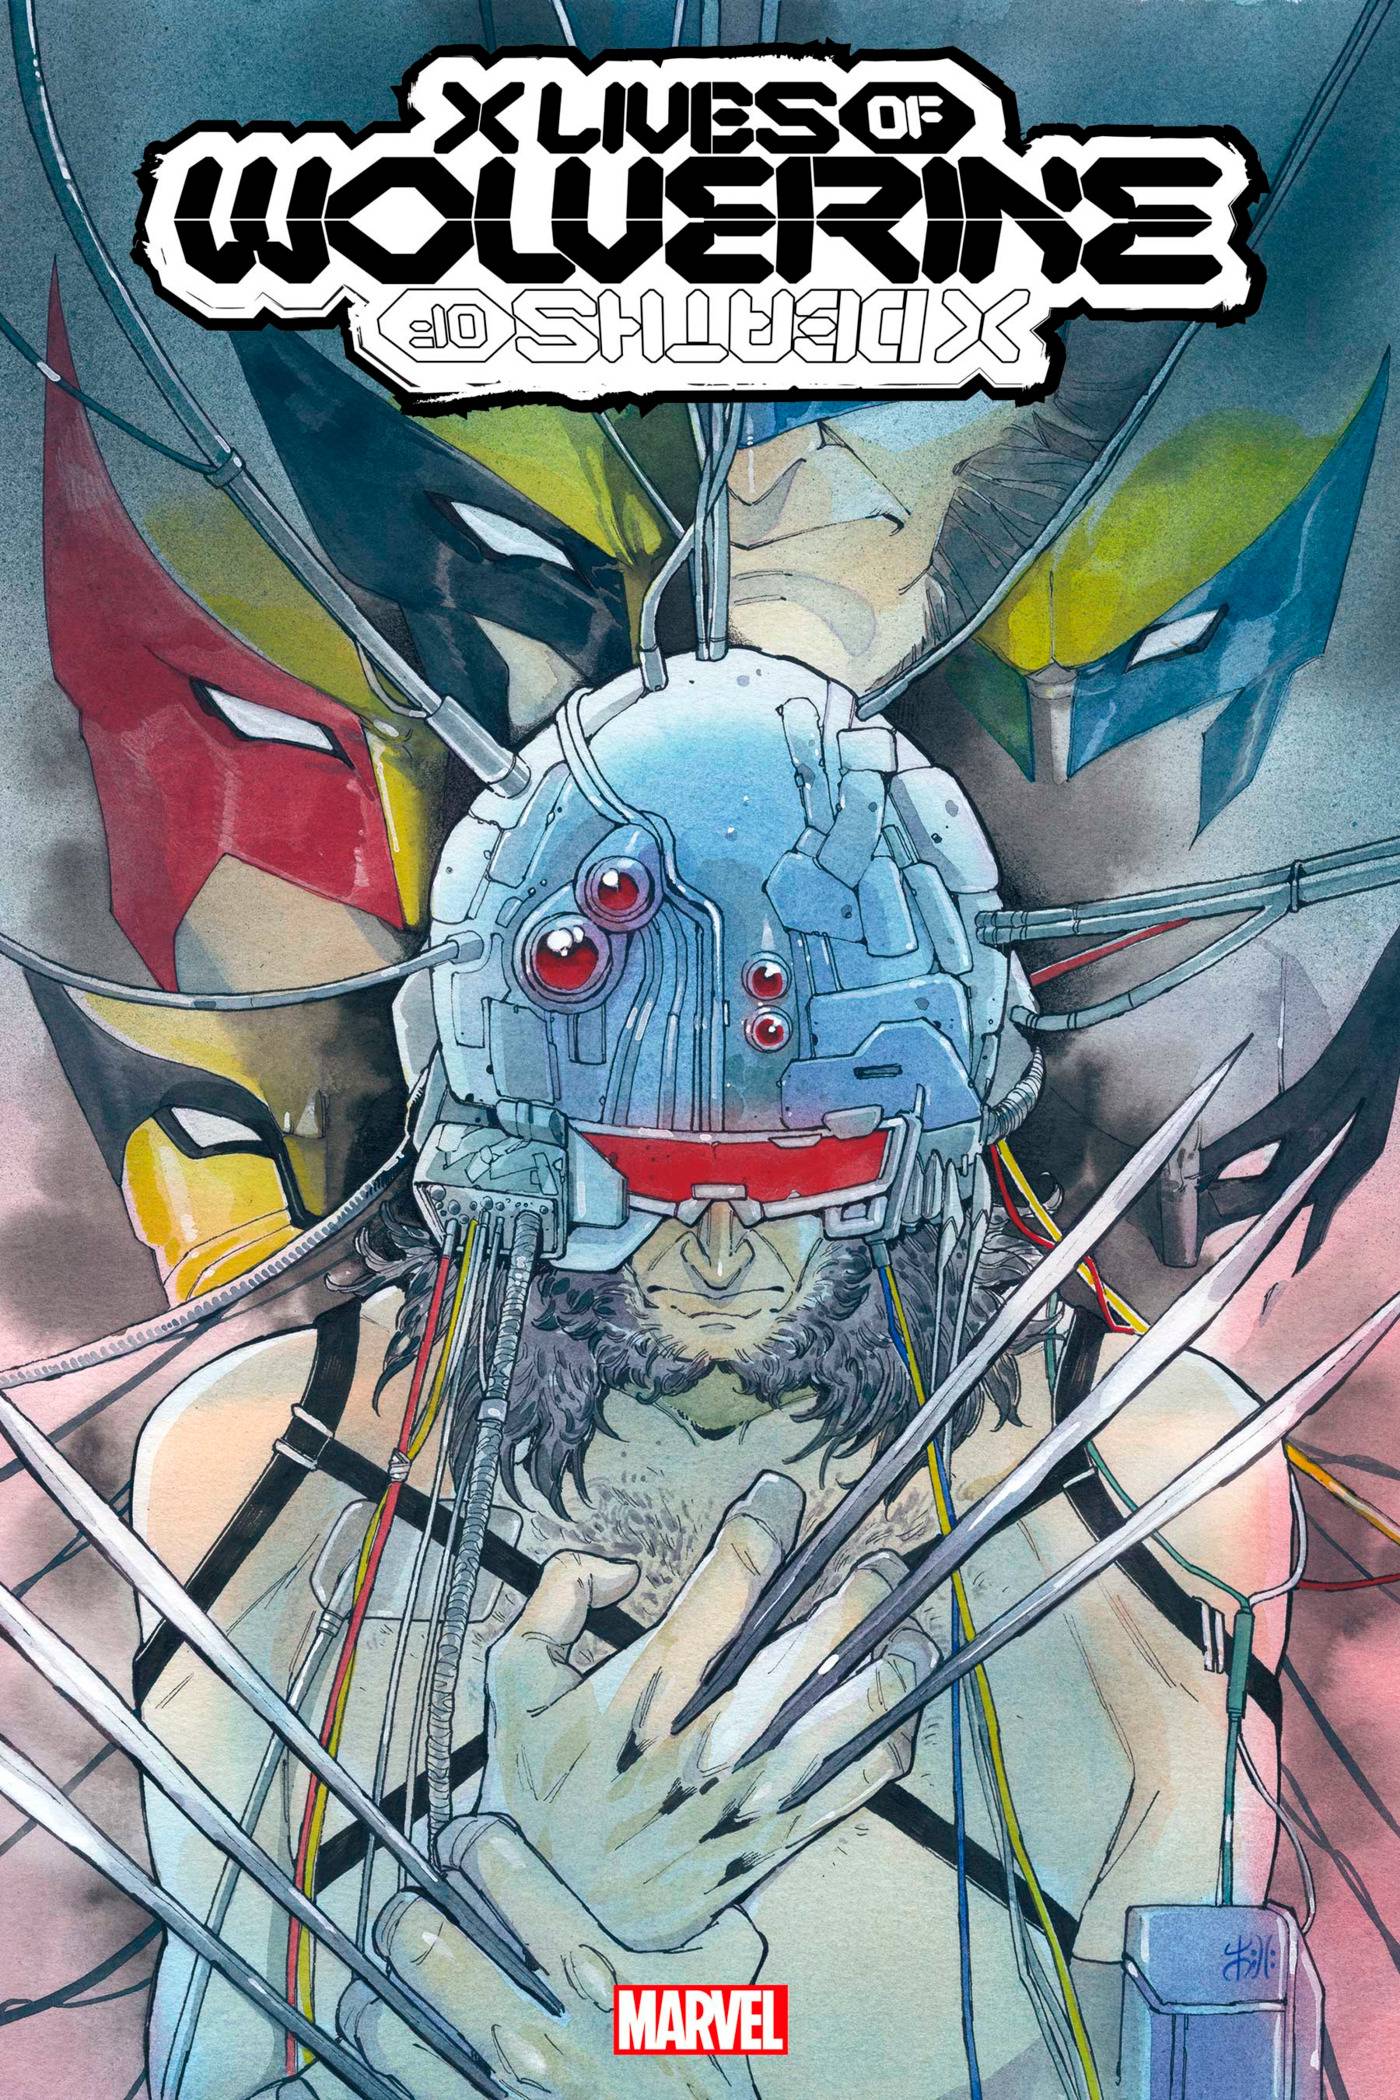 01/19/2022 THE X LIVES OF WOLVERINE #1 MOMOKO VARIANT